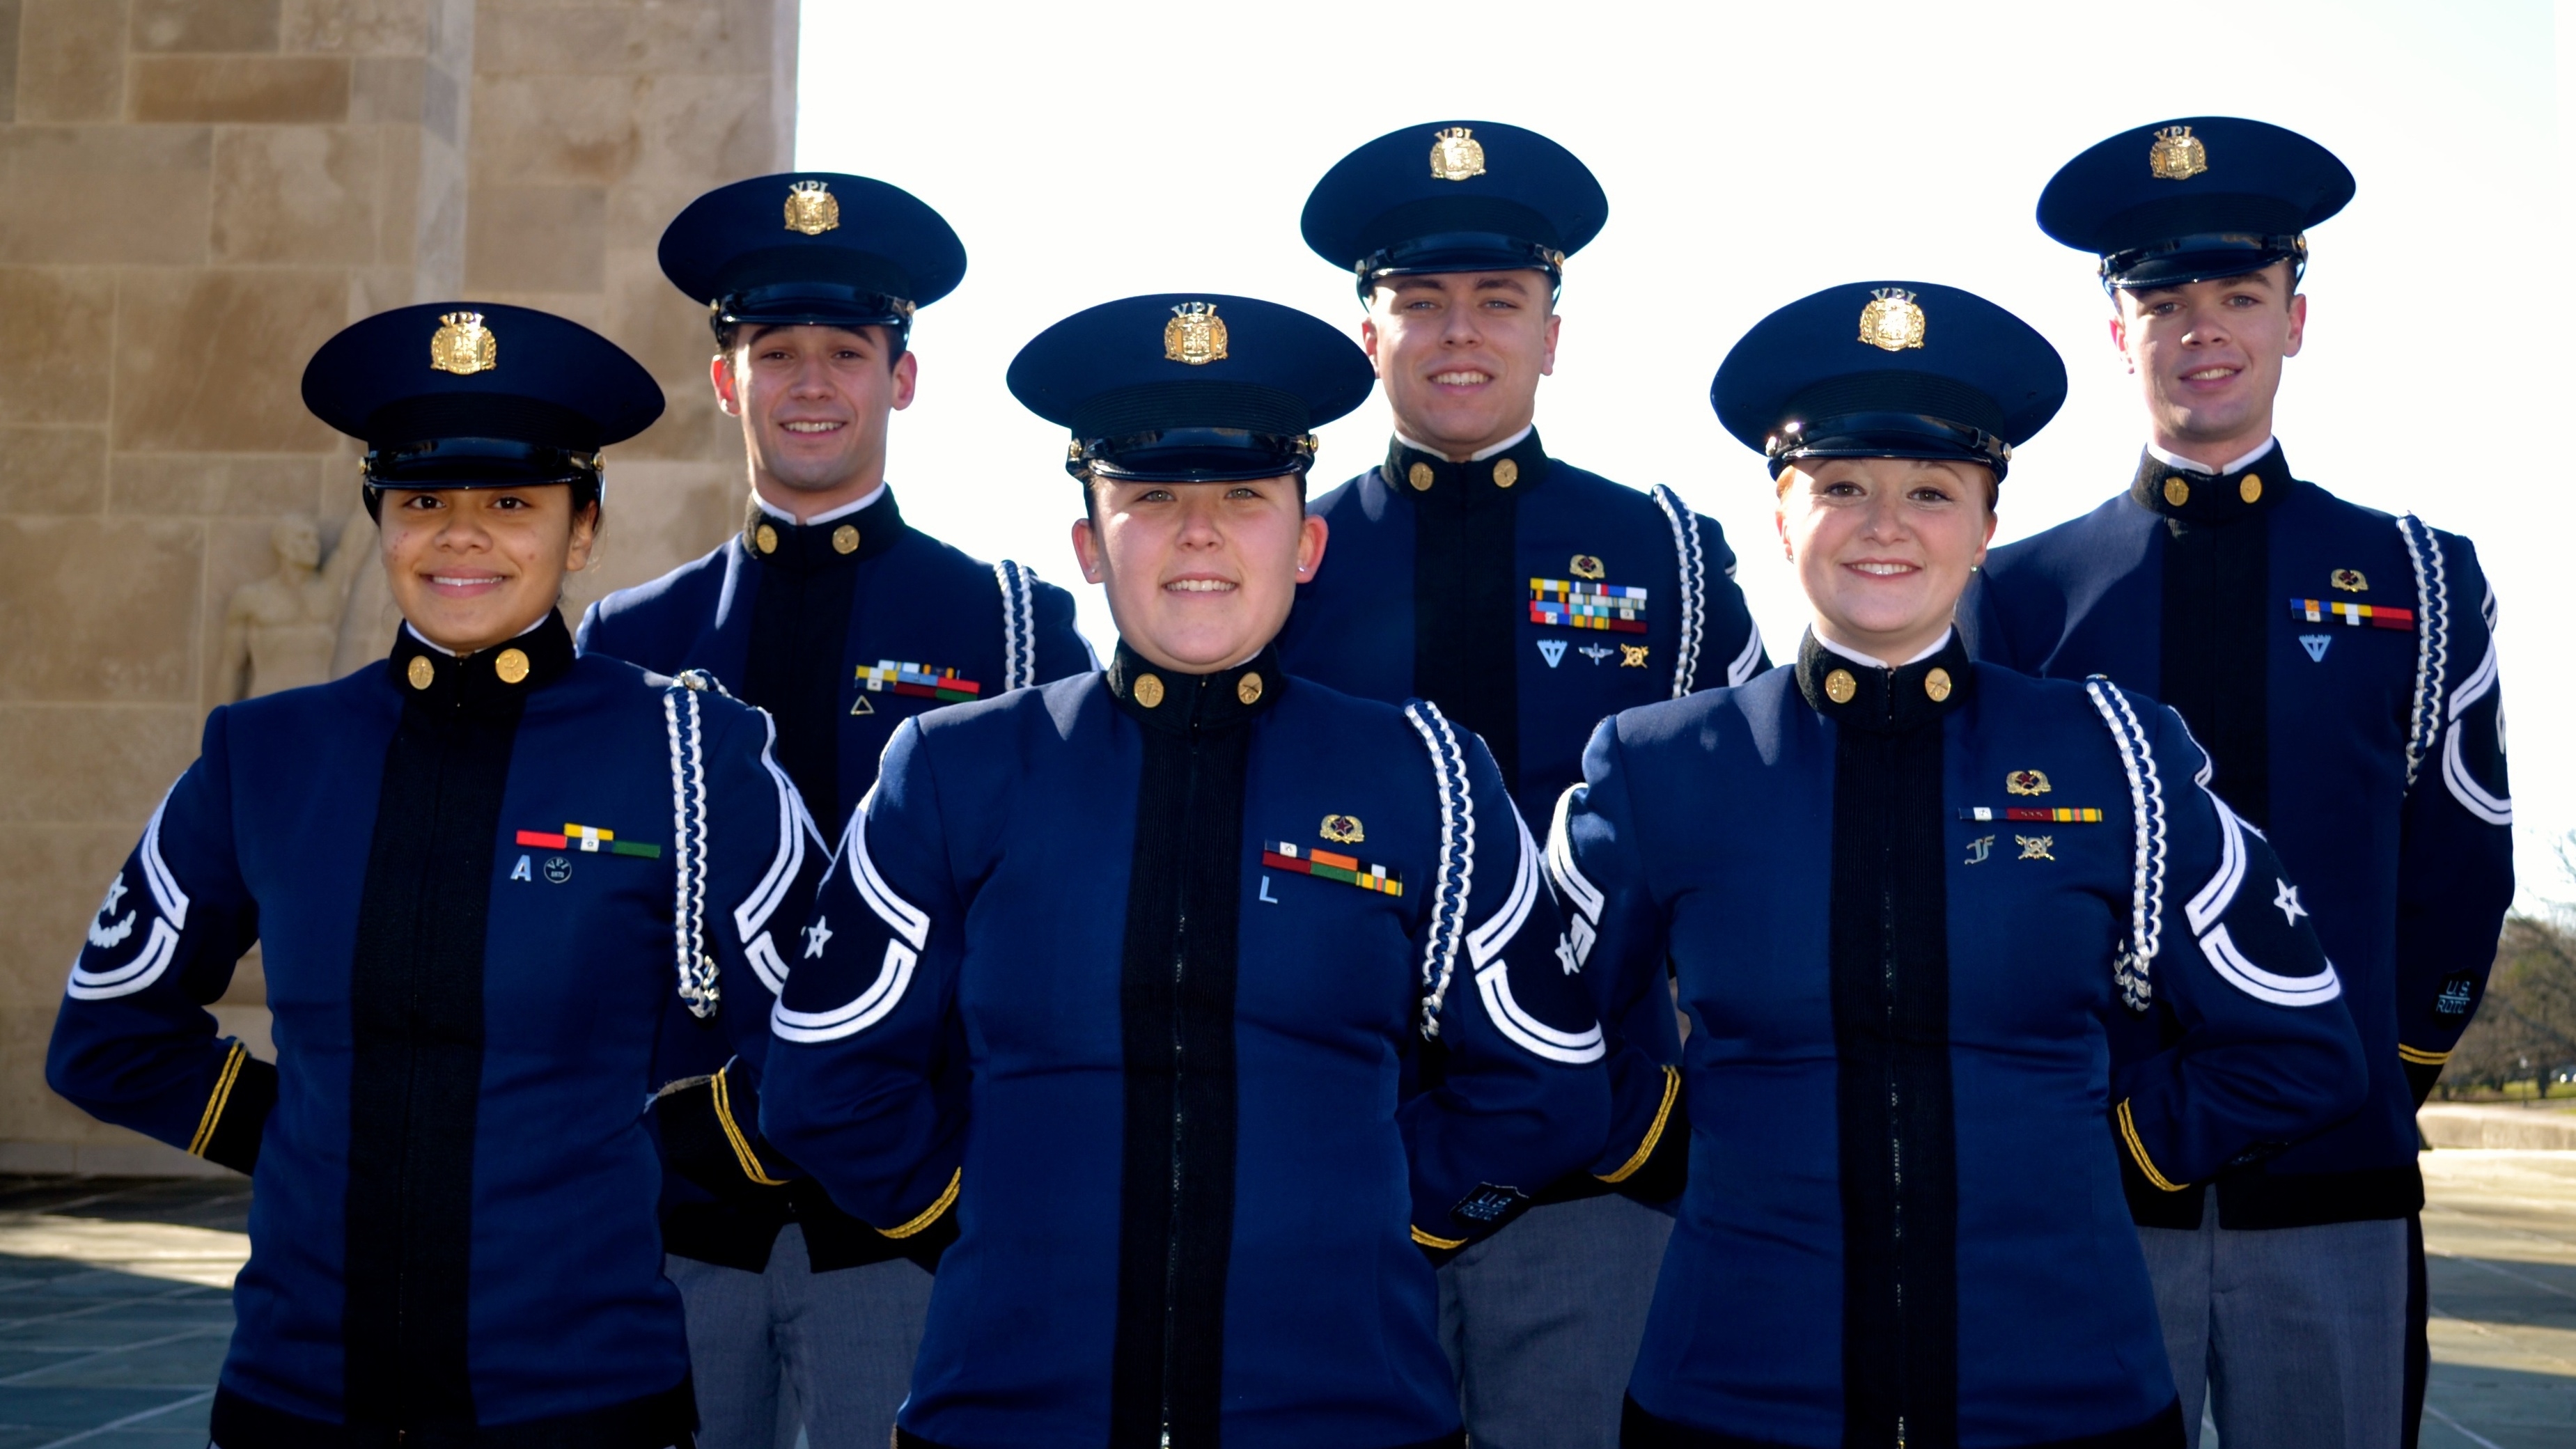 From left to right are members of the Virginia Tech Corps of Cadets Color Guard Cadet Stephanie Morales, Cadet Christopher Jimenez, Cadet Kristen Calhoun, Cadet Christopher Blaney, Cadet Lindsey Hobbs, and Cadet Brady Marston at the Pylons.